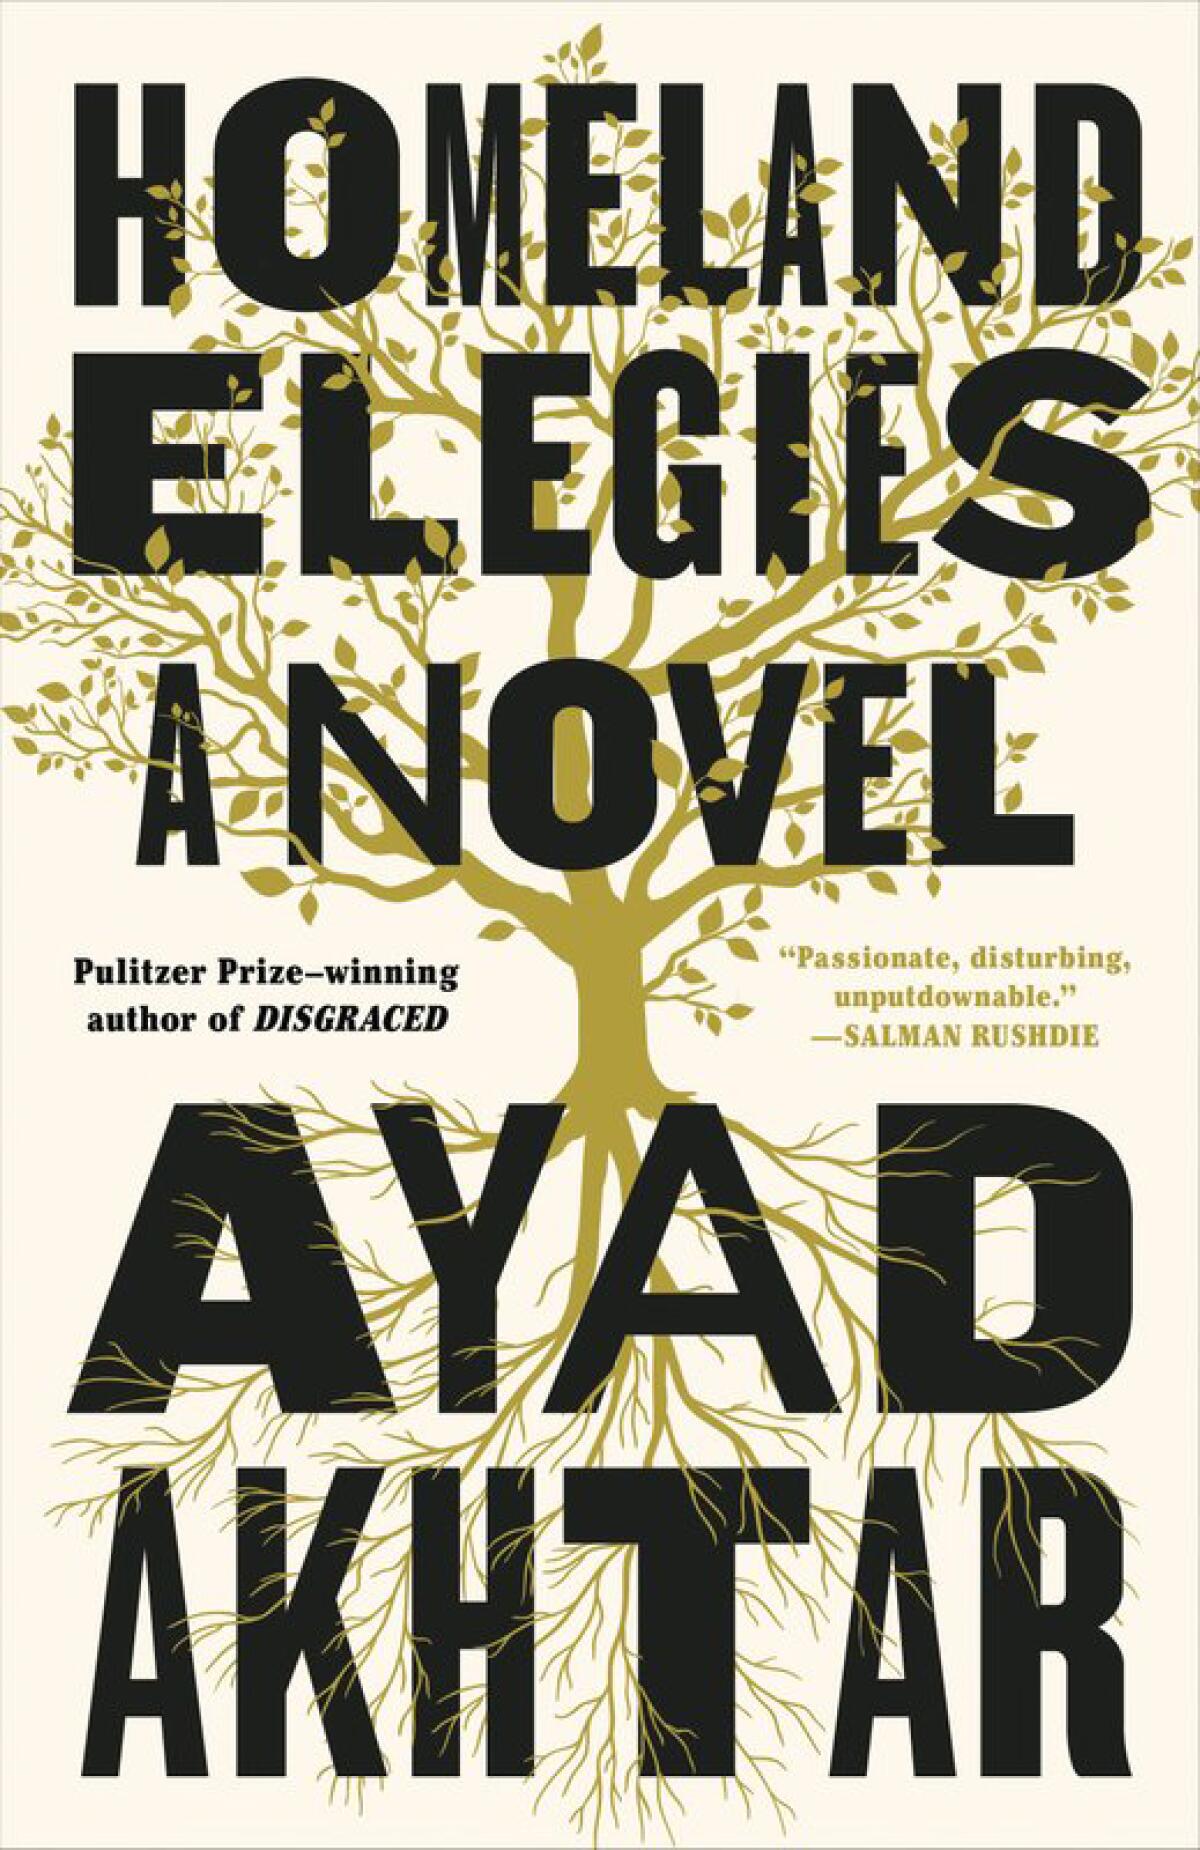 Cover image for "Homeland Elegies," by Ayad Akhtar.